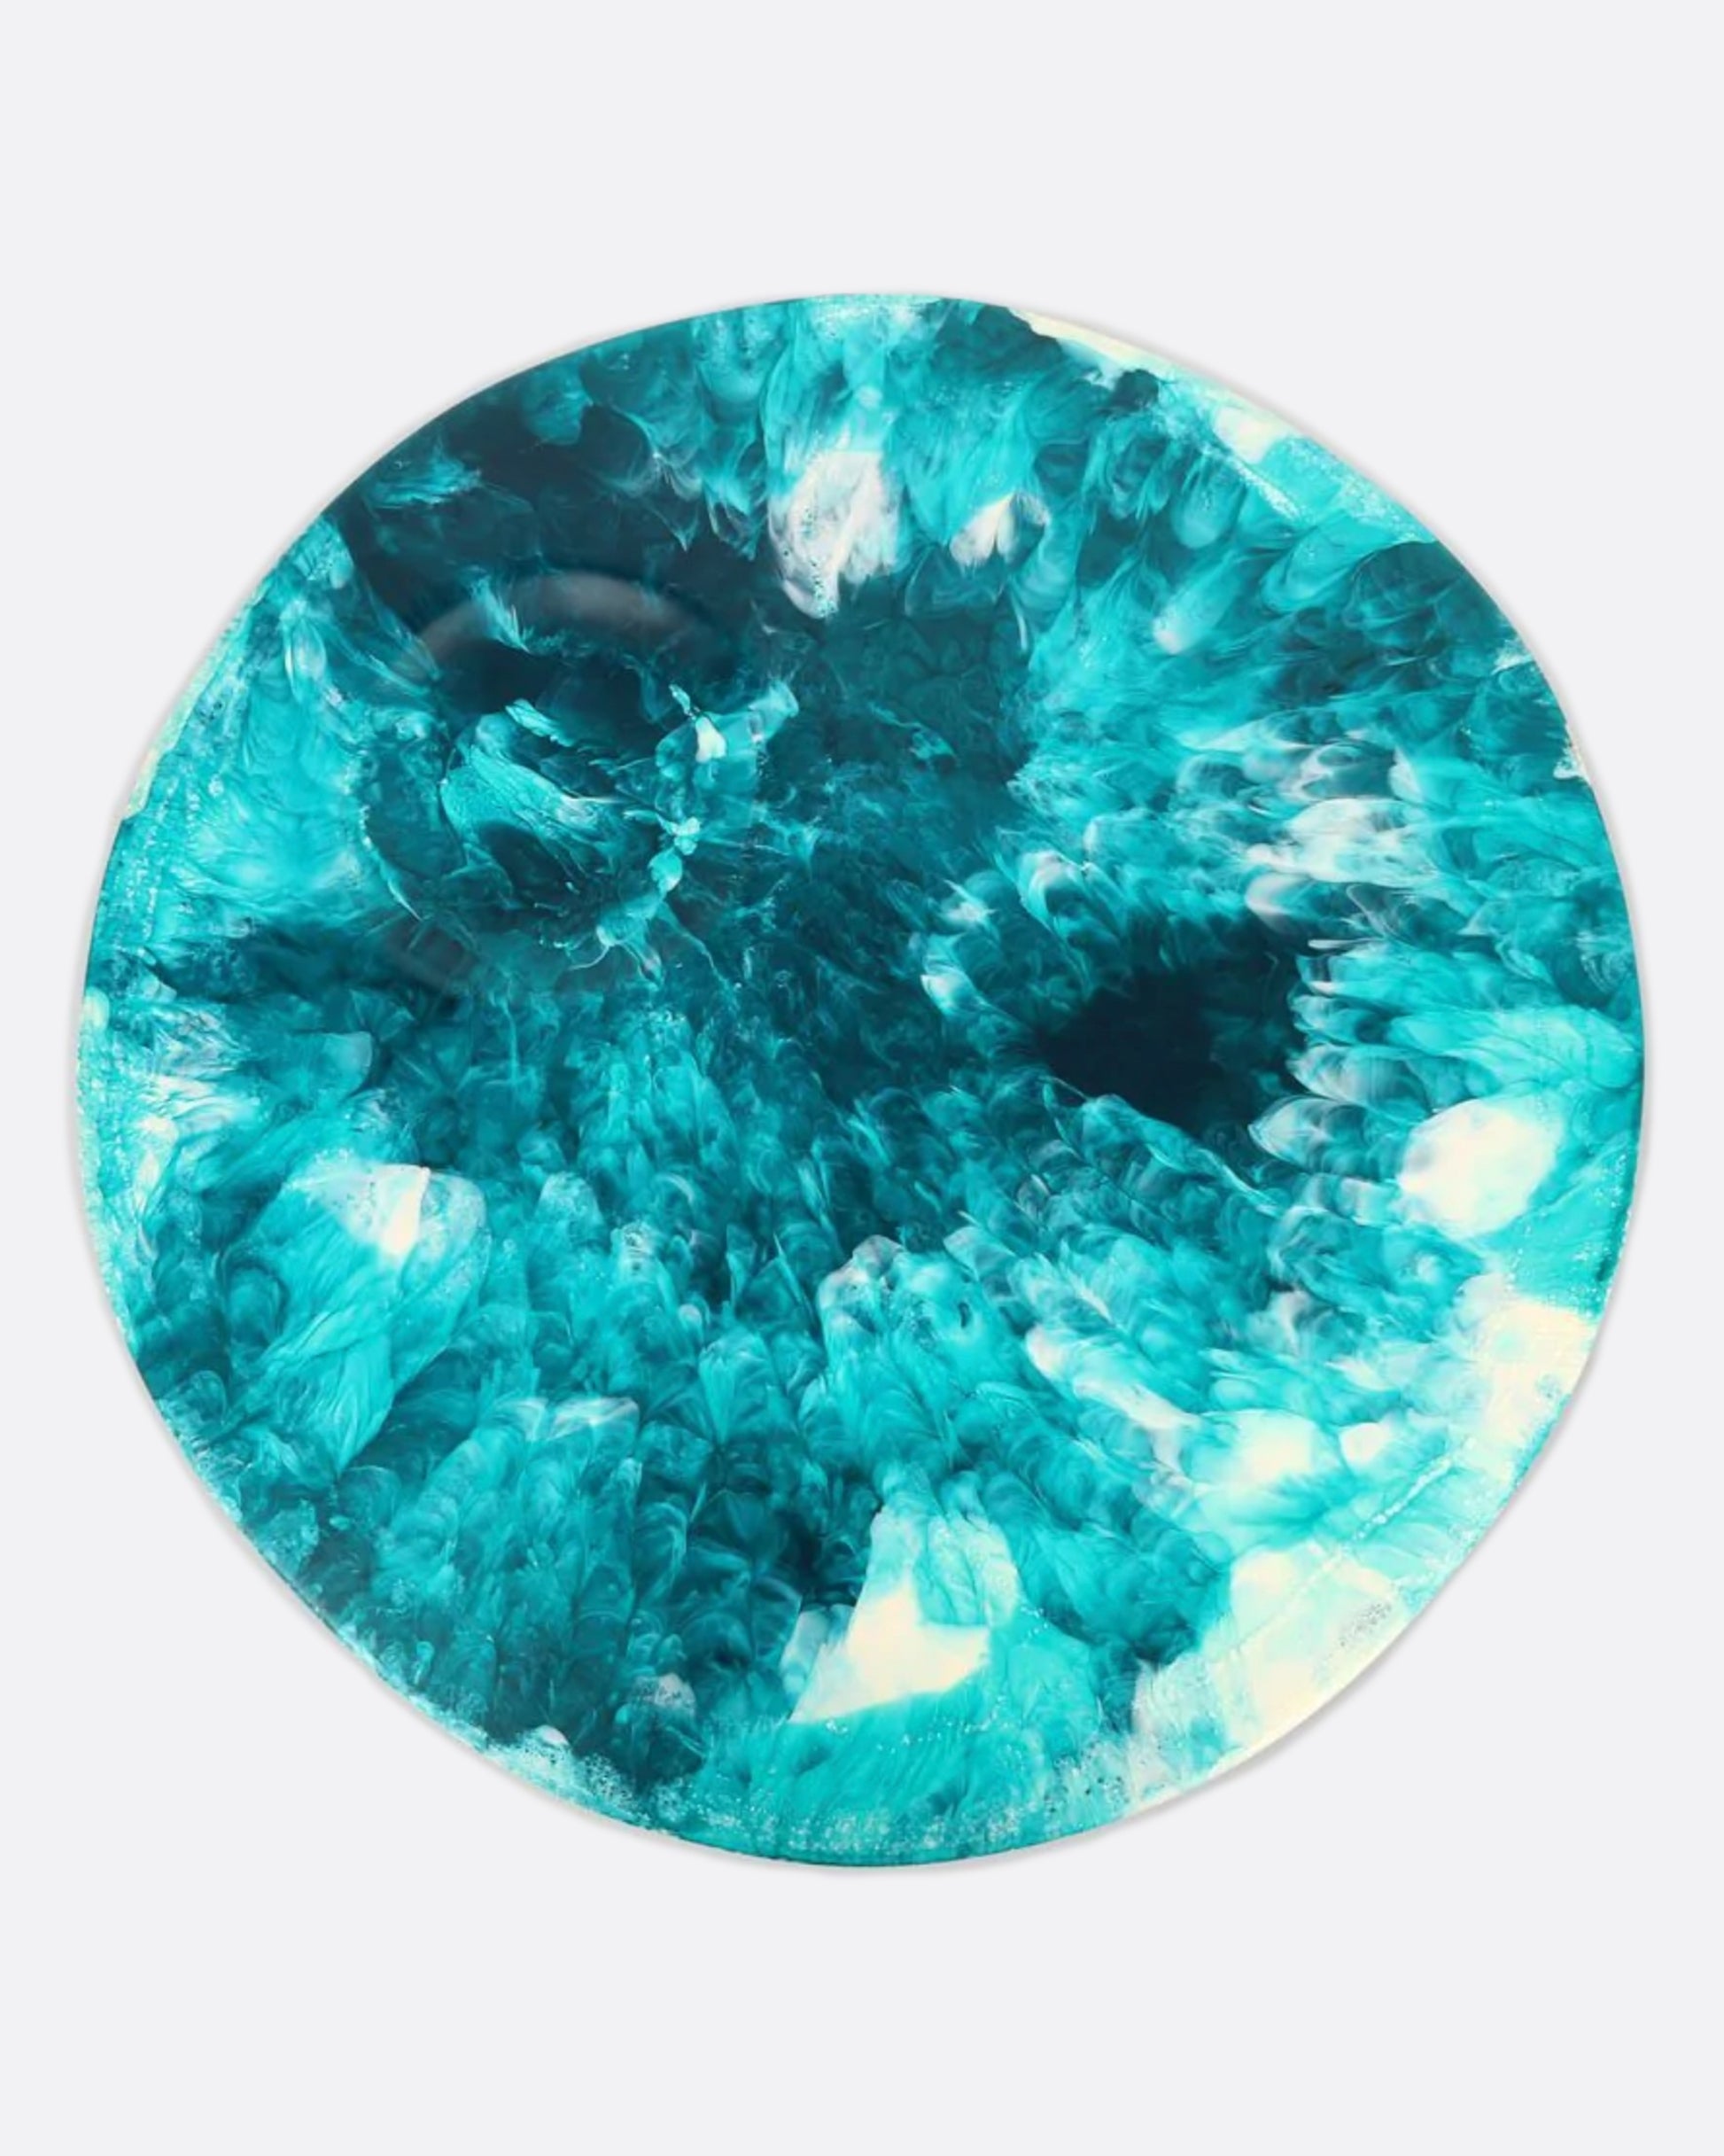 A round teal blue and white resin platter with a round indentation, shown from above.